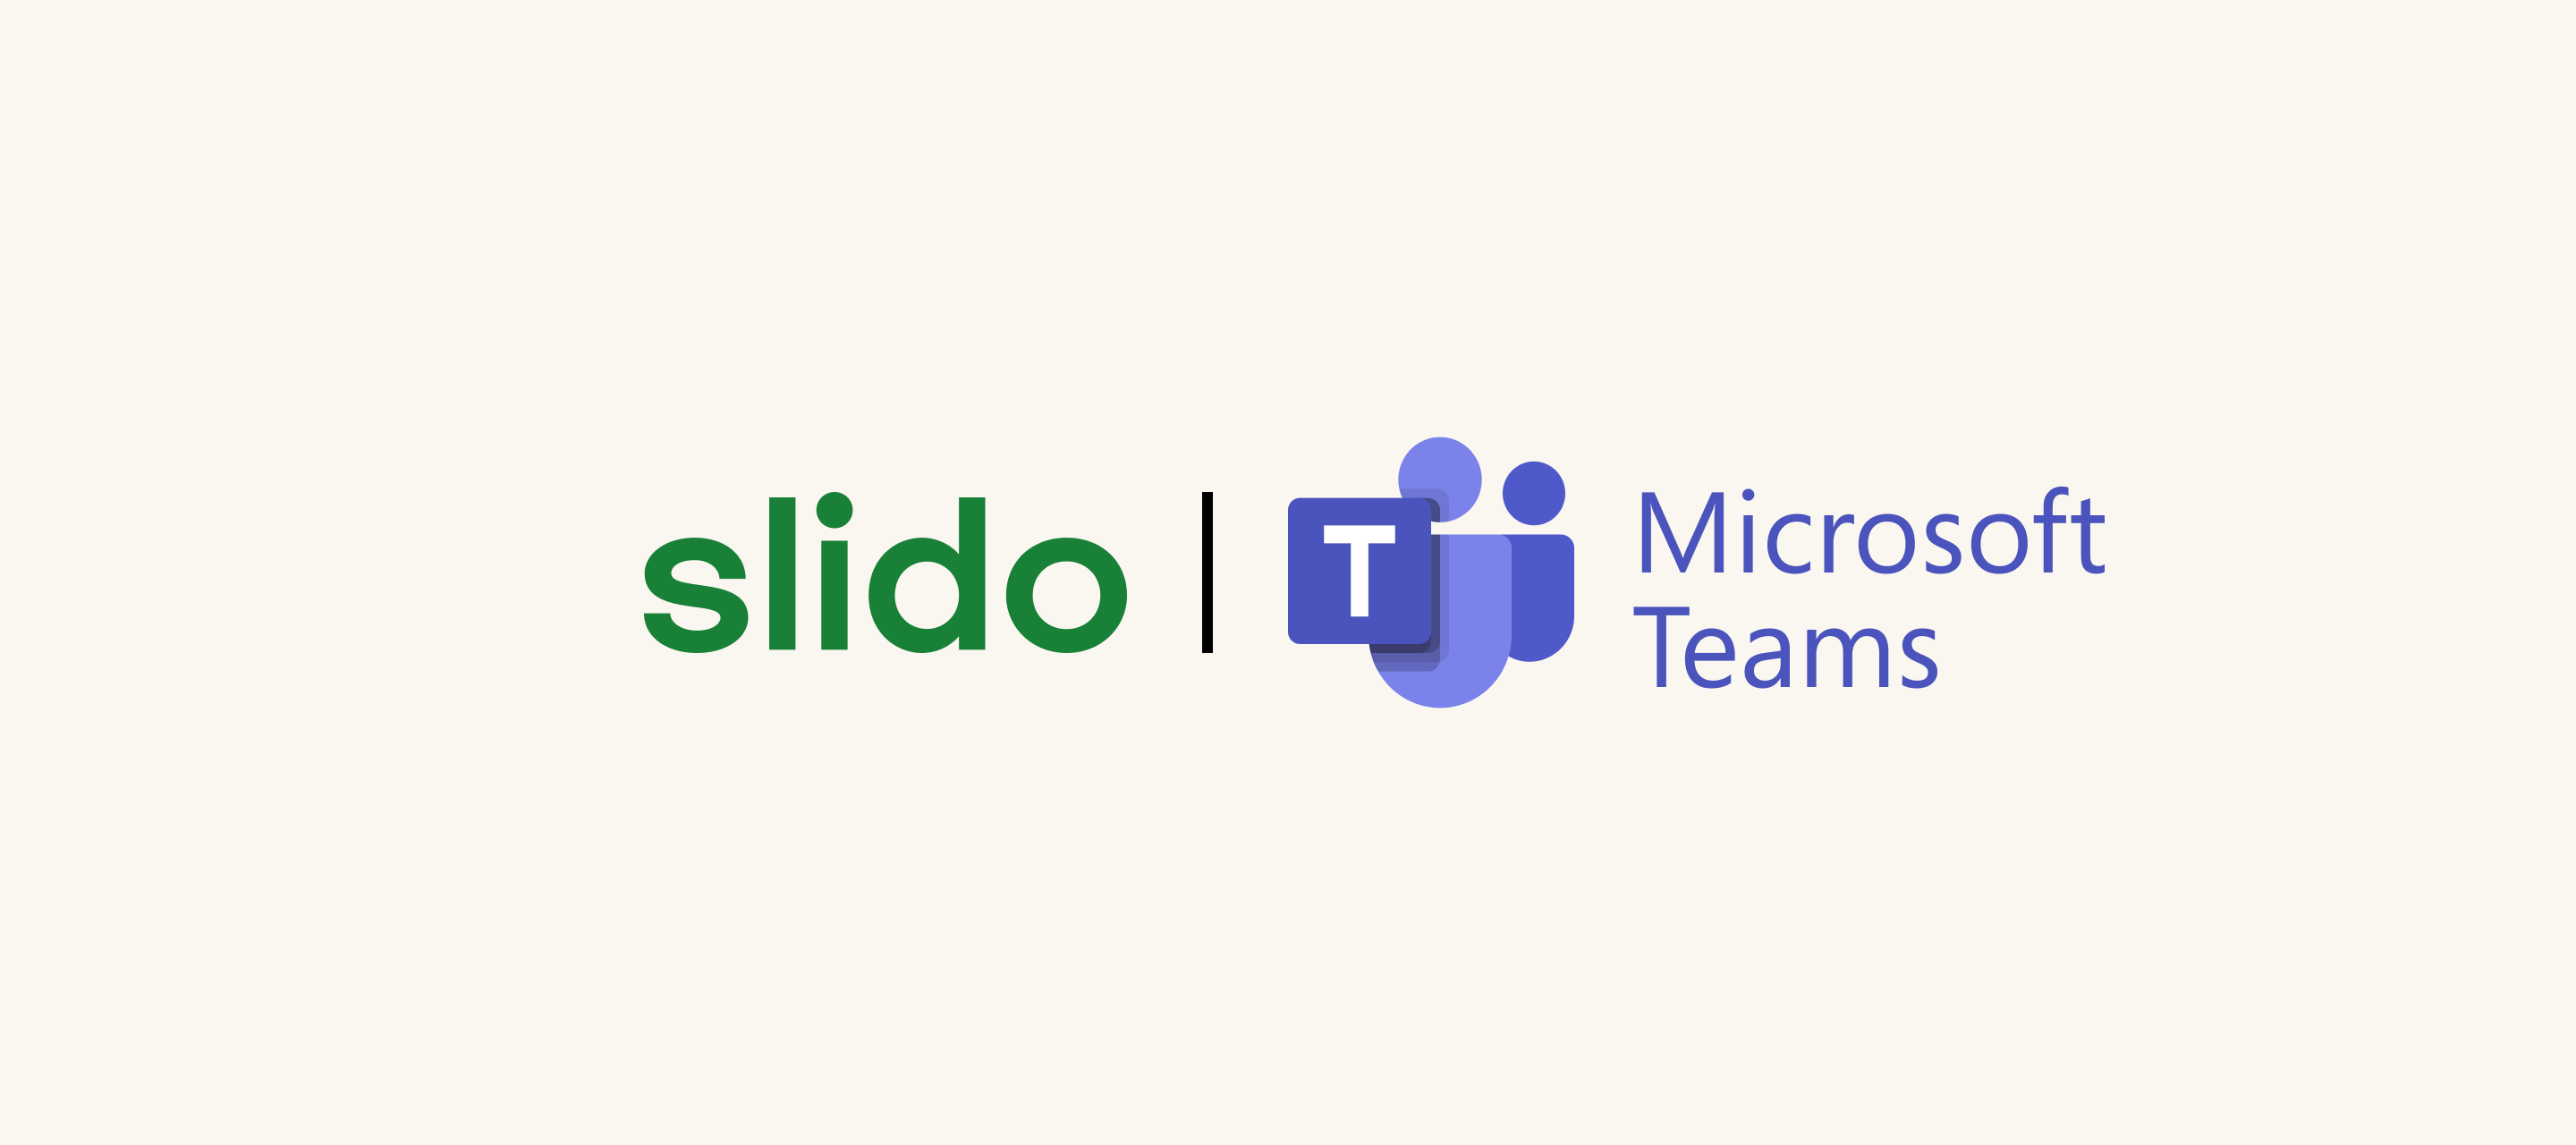 New pre-meeting and voting experience in Slido for Microsoft Teams